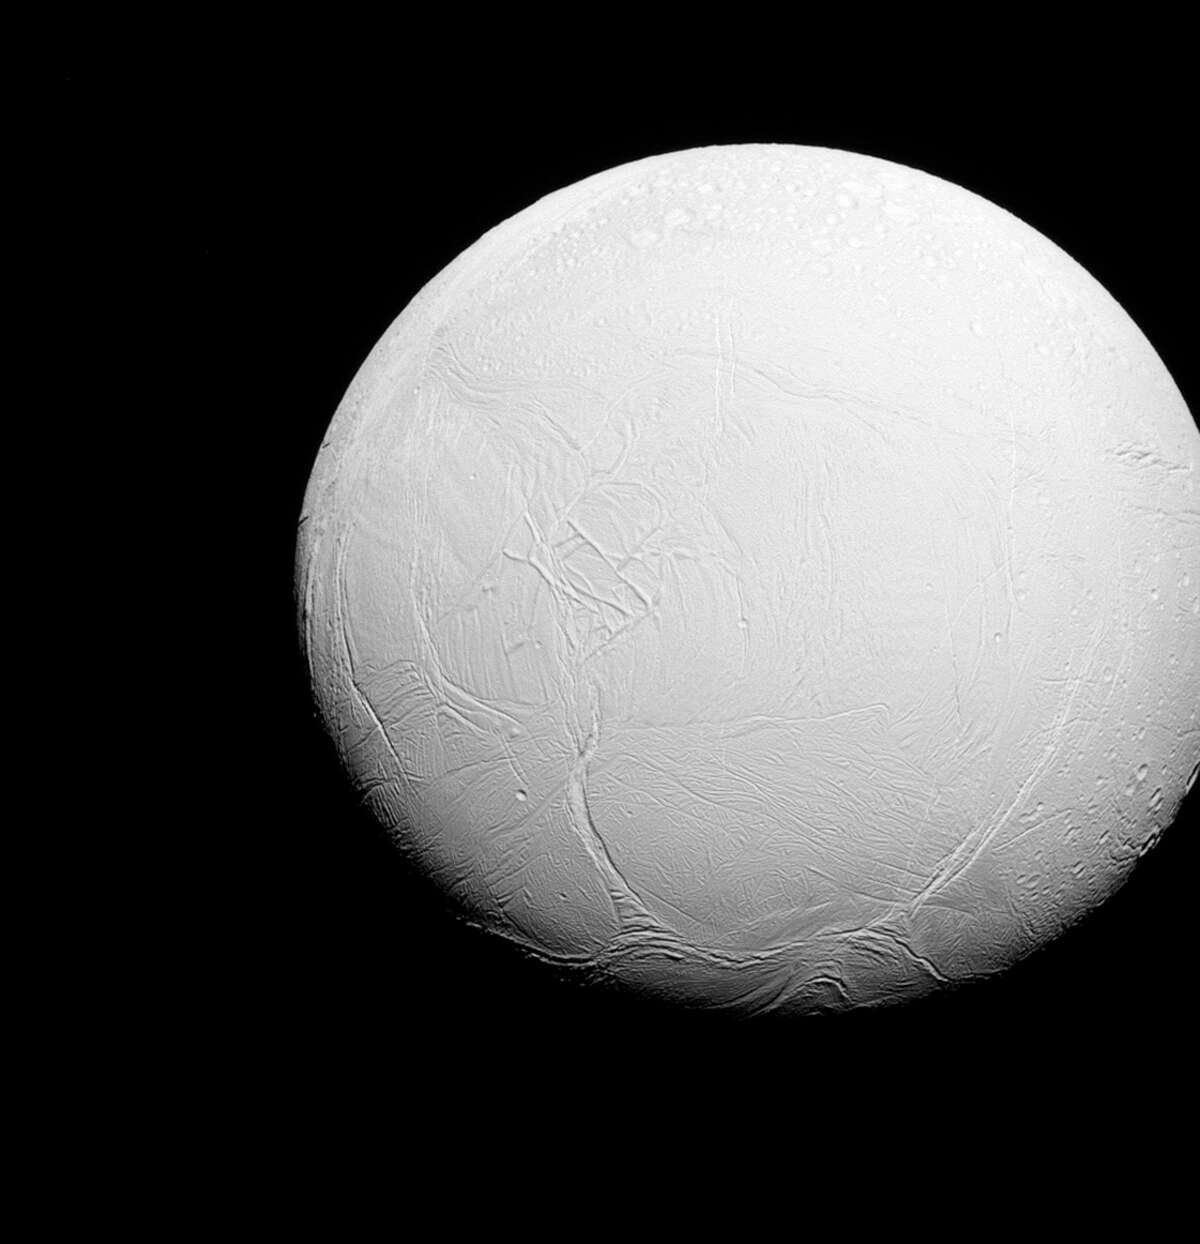 This July 2015 photo taken by the Cassini spacecraft shows the moon Enceladus orbiting Saturn.